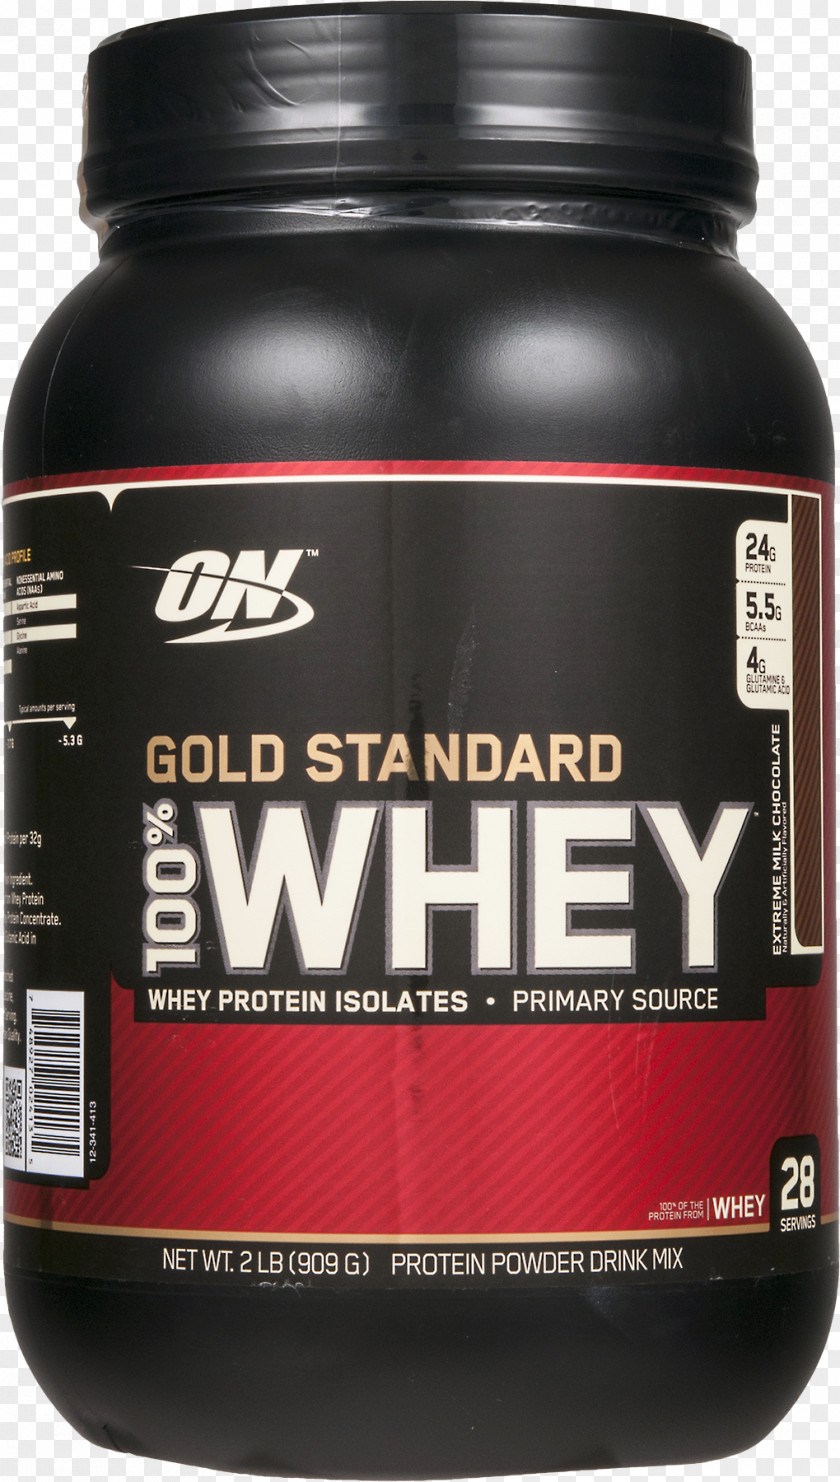 Health Dietary Supplement Whey Protein Isolate Bodybuilding PNG